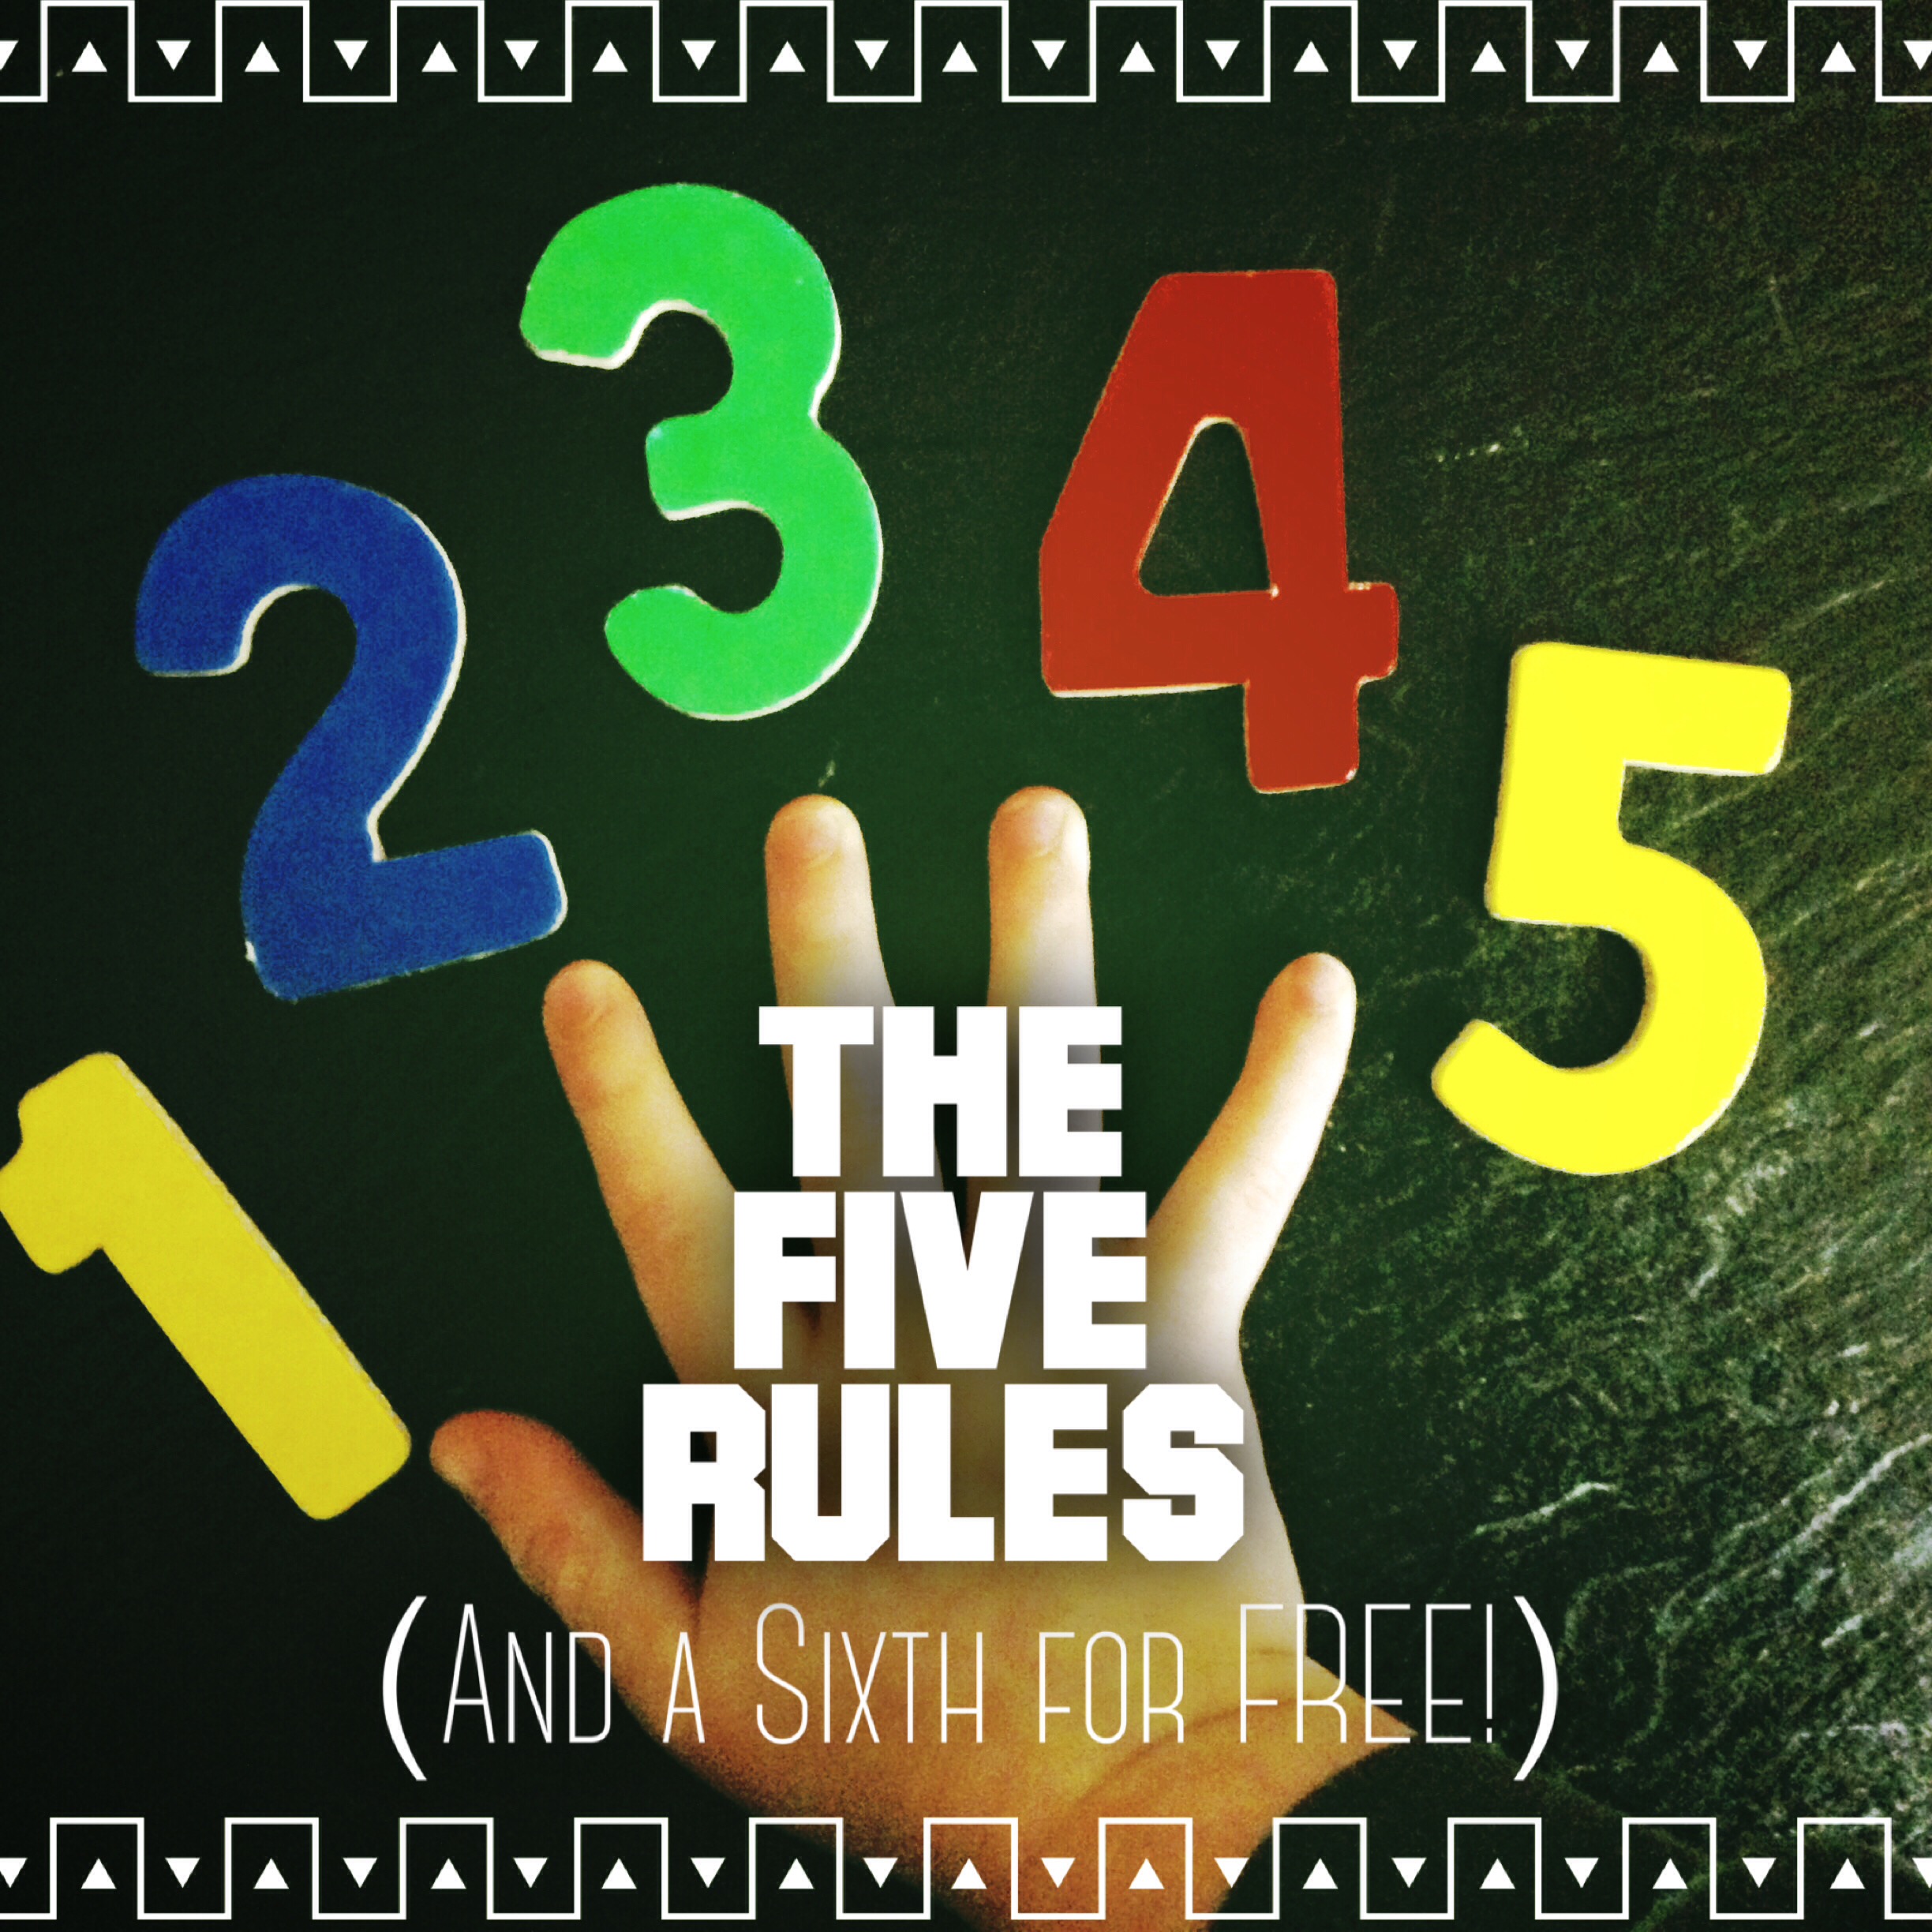 The Five Rules - The Bitty-Bits Blog